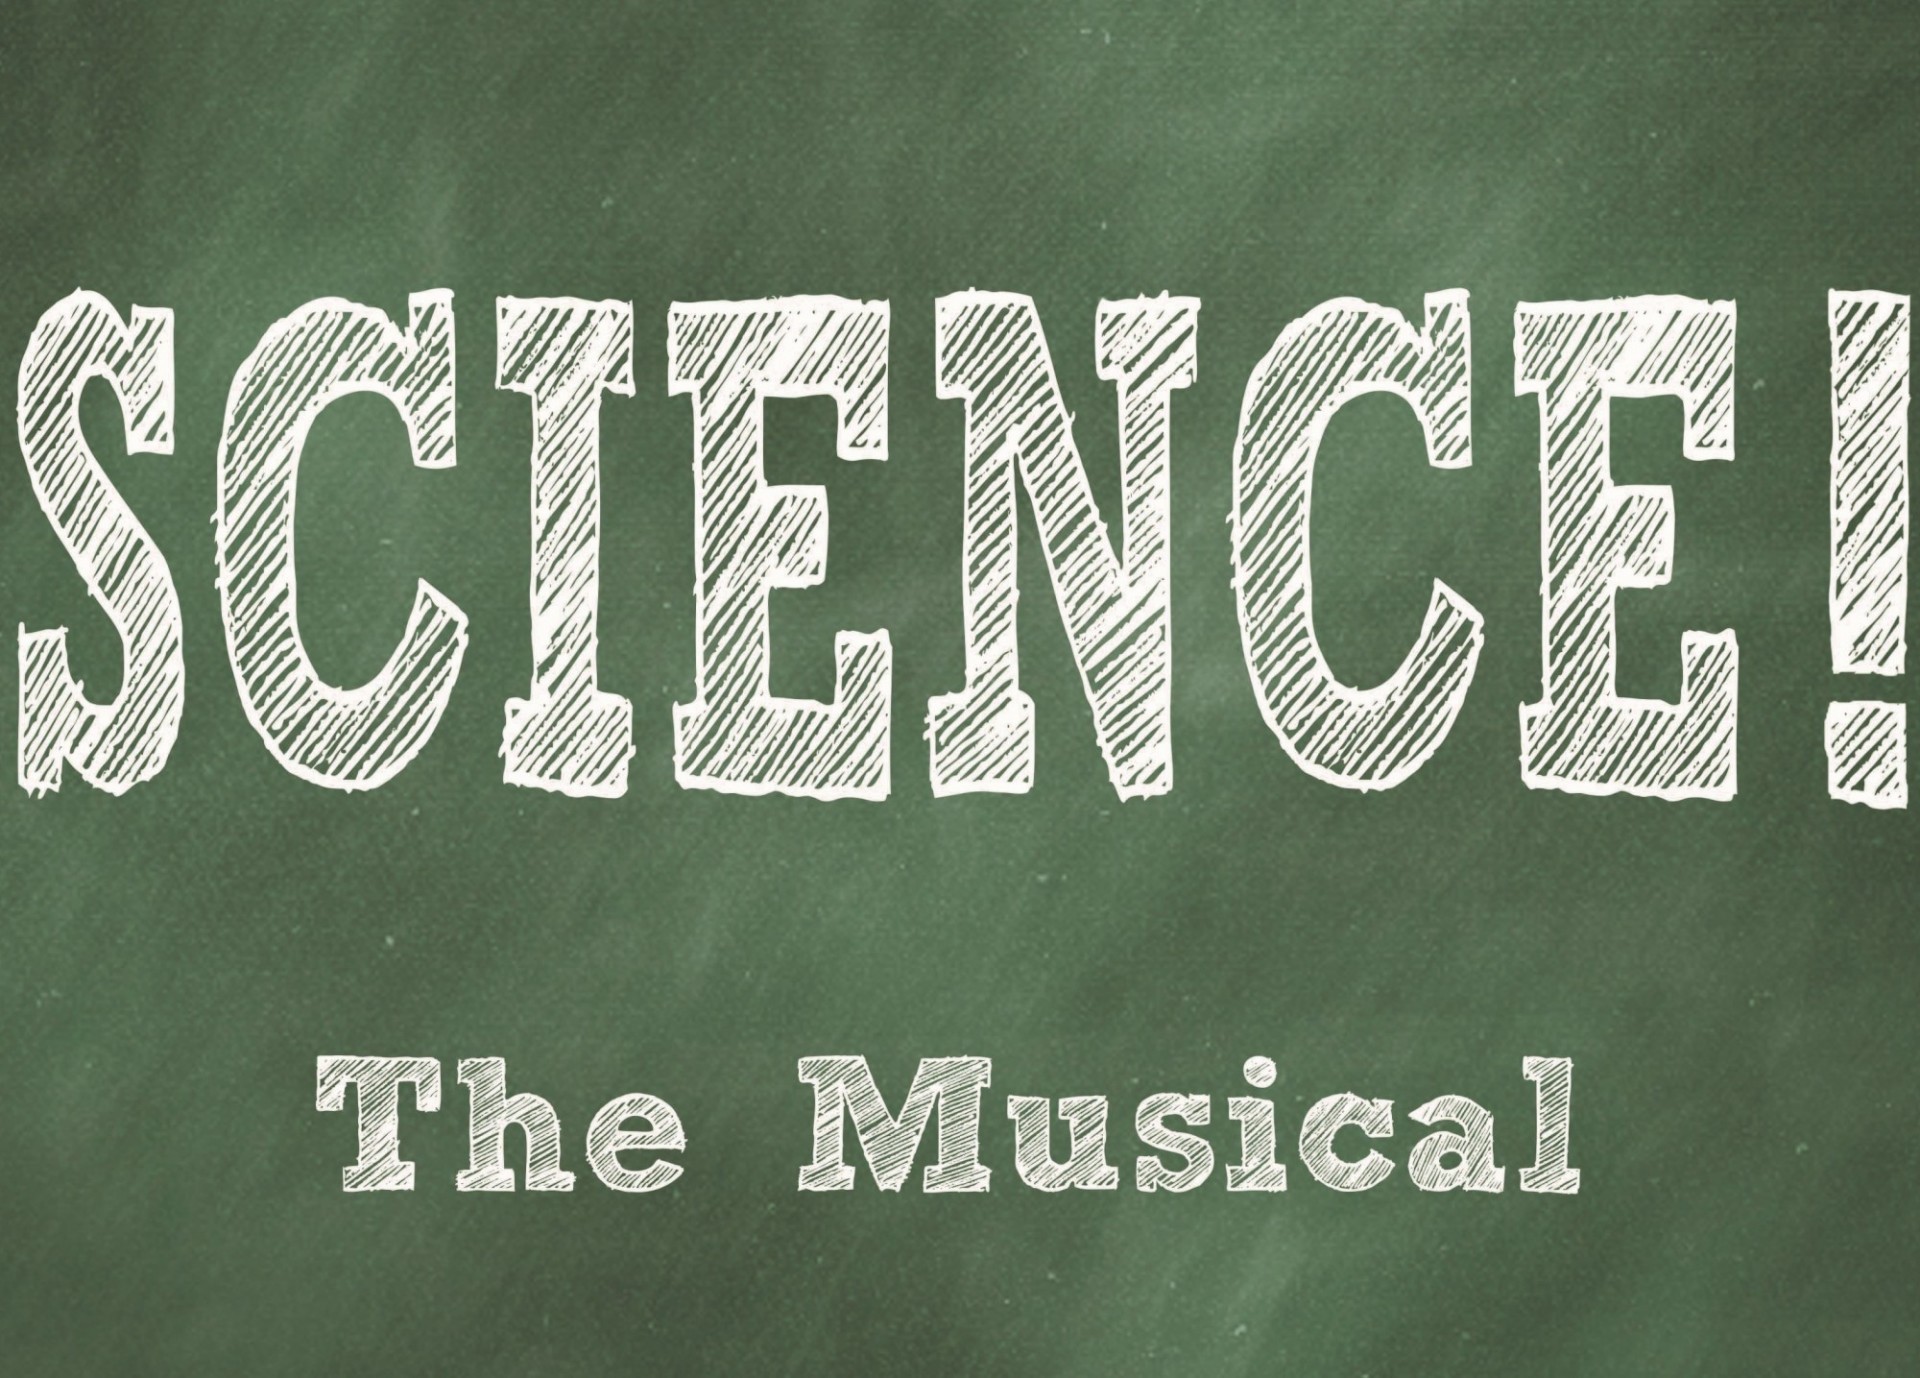 Photo of "Science! The Musical" poster on a green background